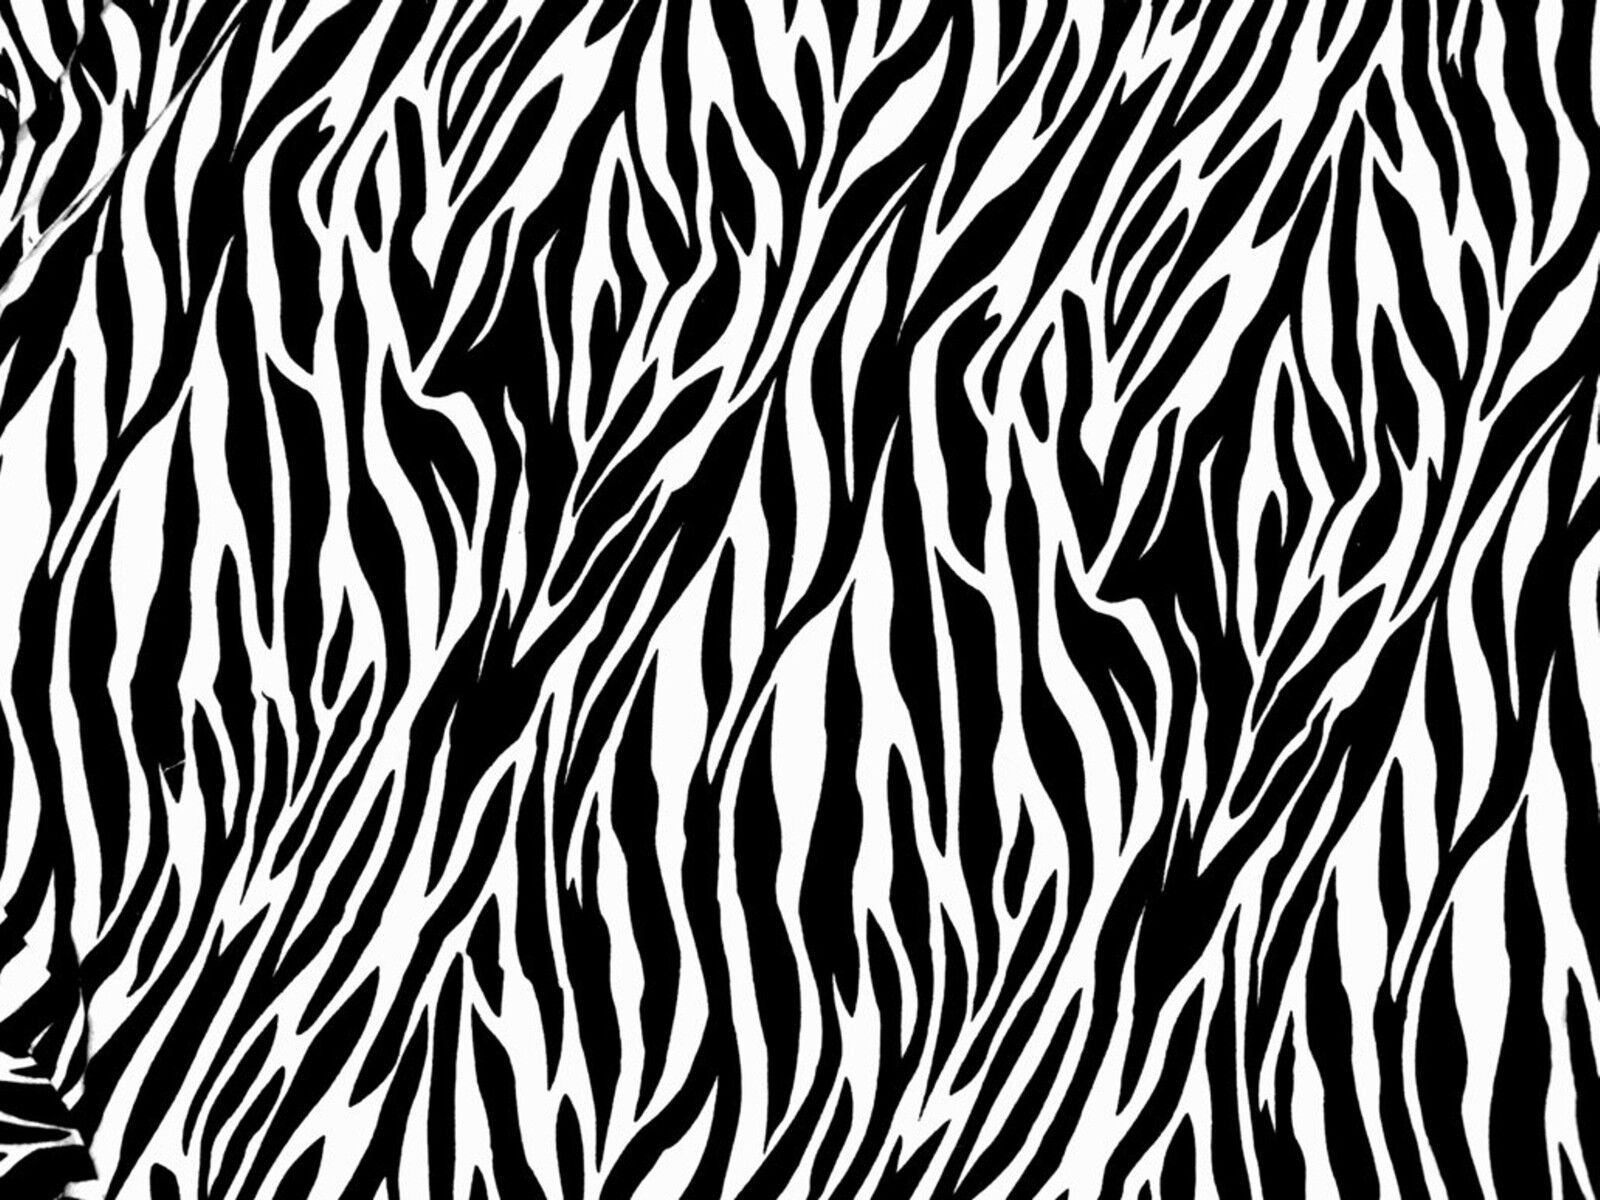 Zebra Print black and white edible Cake Decor Topper Icing Sheet  Toppers Decoration